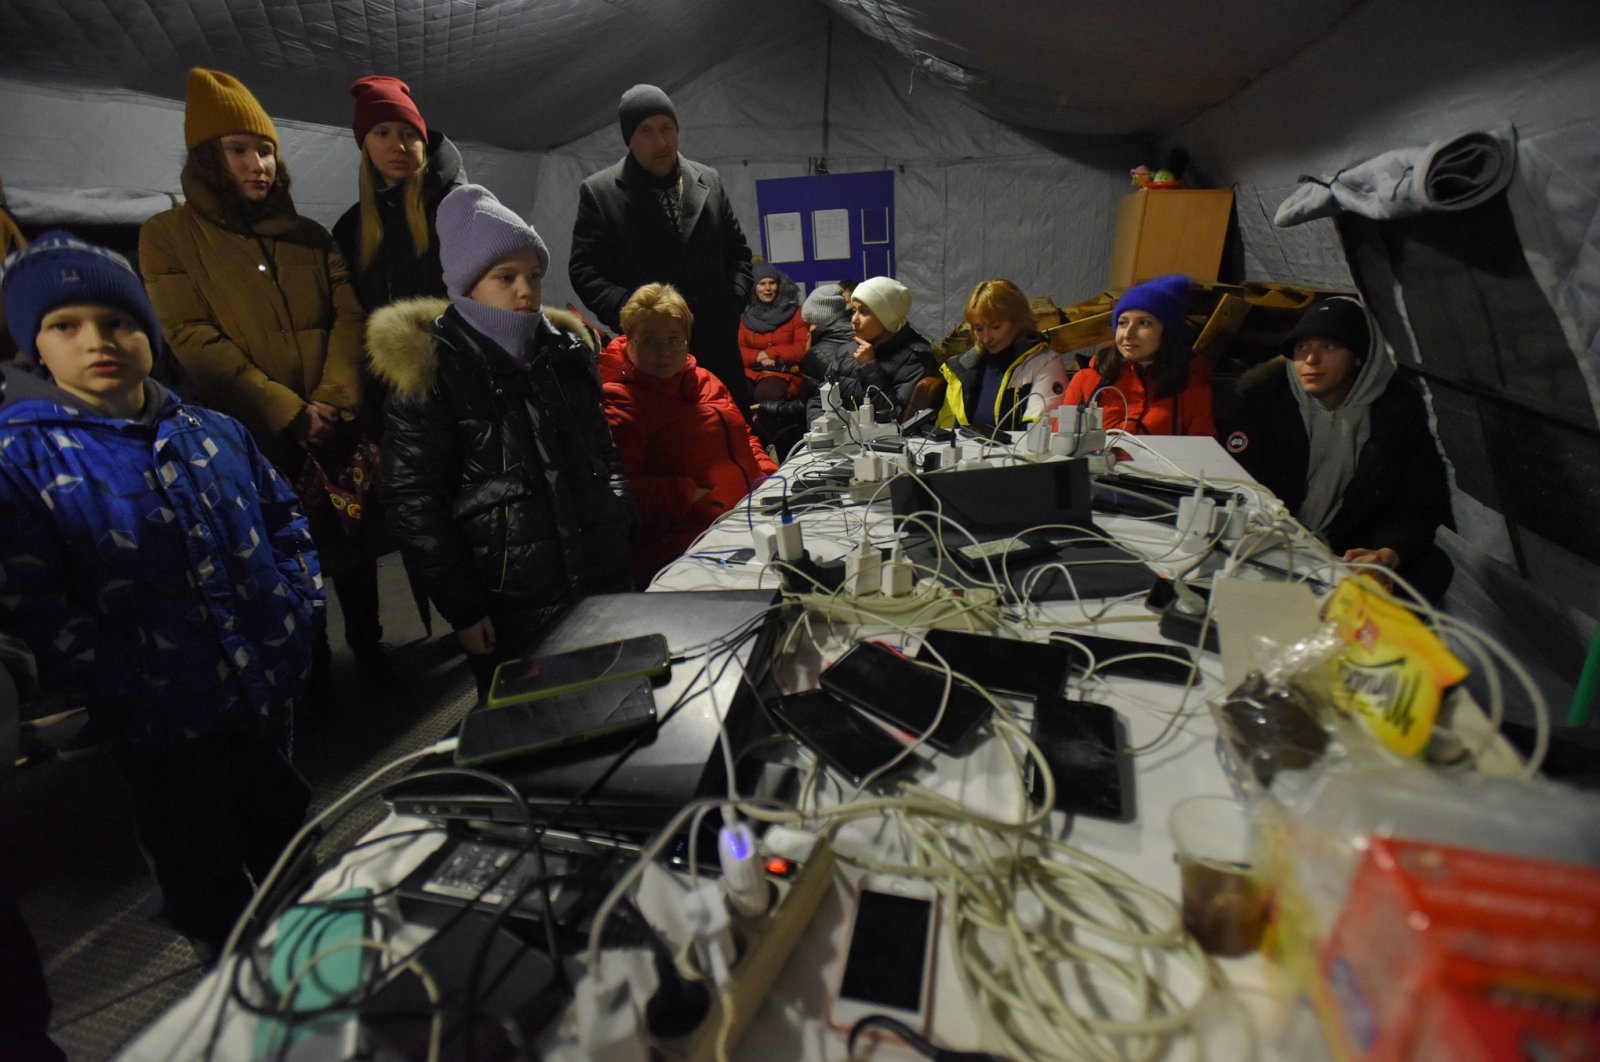 People charge their devices from a power generator at a heating point, Kyiv, Ukraine, Nov. 24, 2022. (EPA Photos)